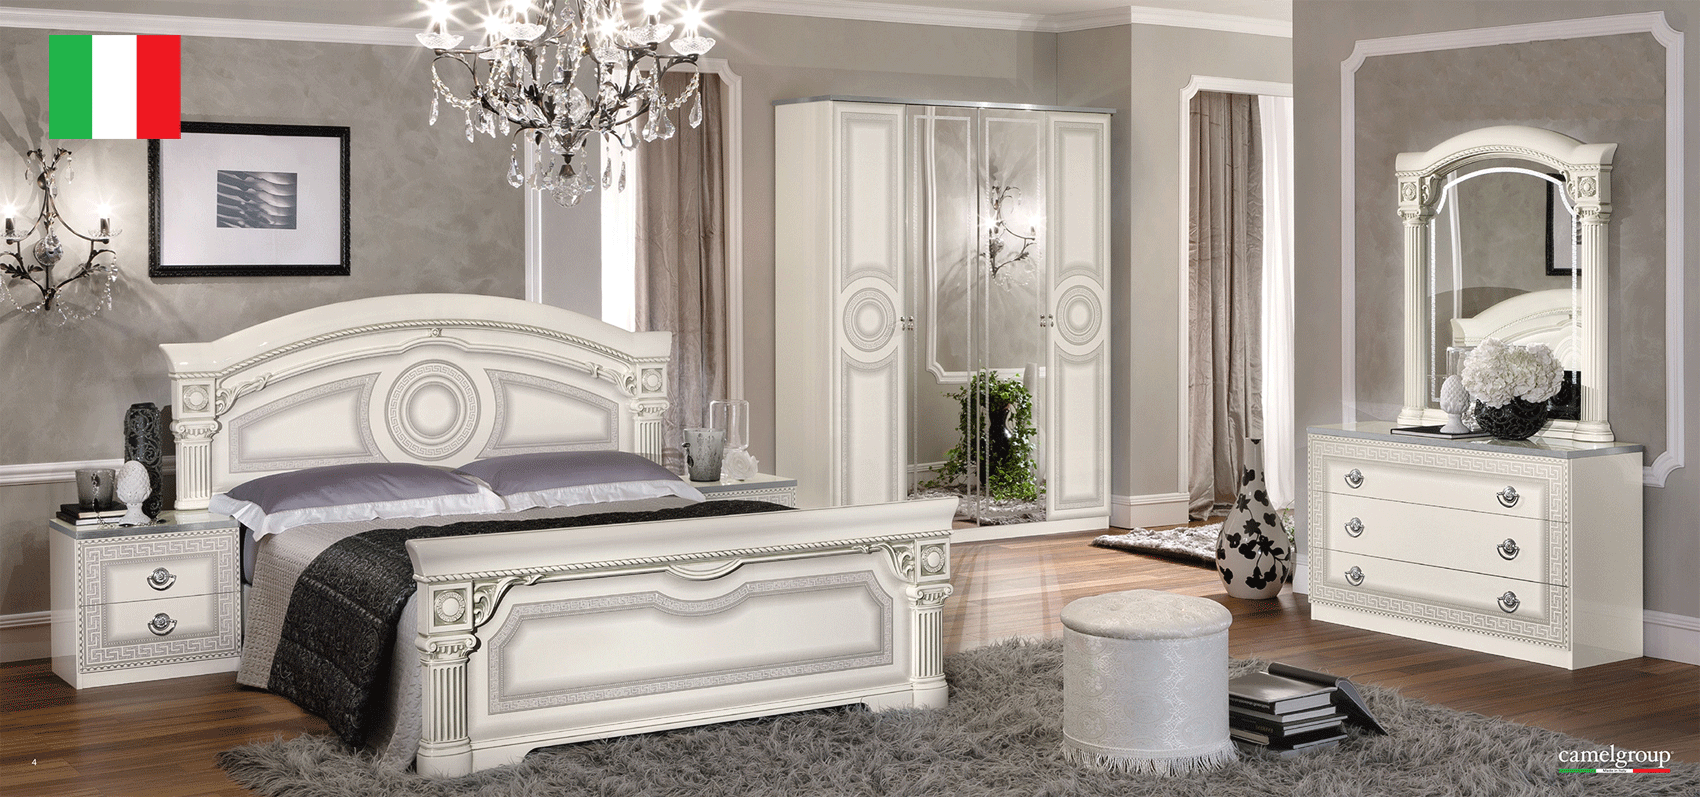 Wallunits Hallway Console tables and Mirrors Aida Bedroom, White w/Silver, Camelgroup Italy